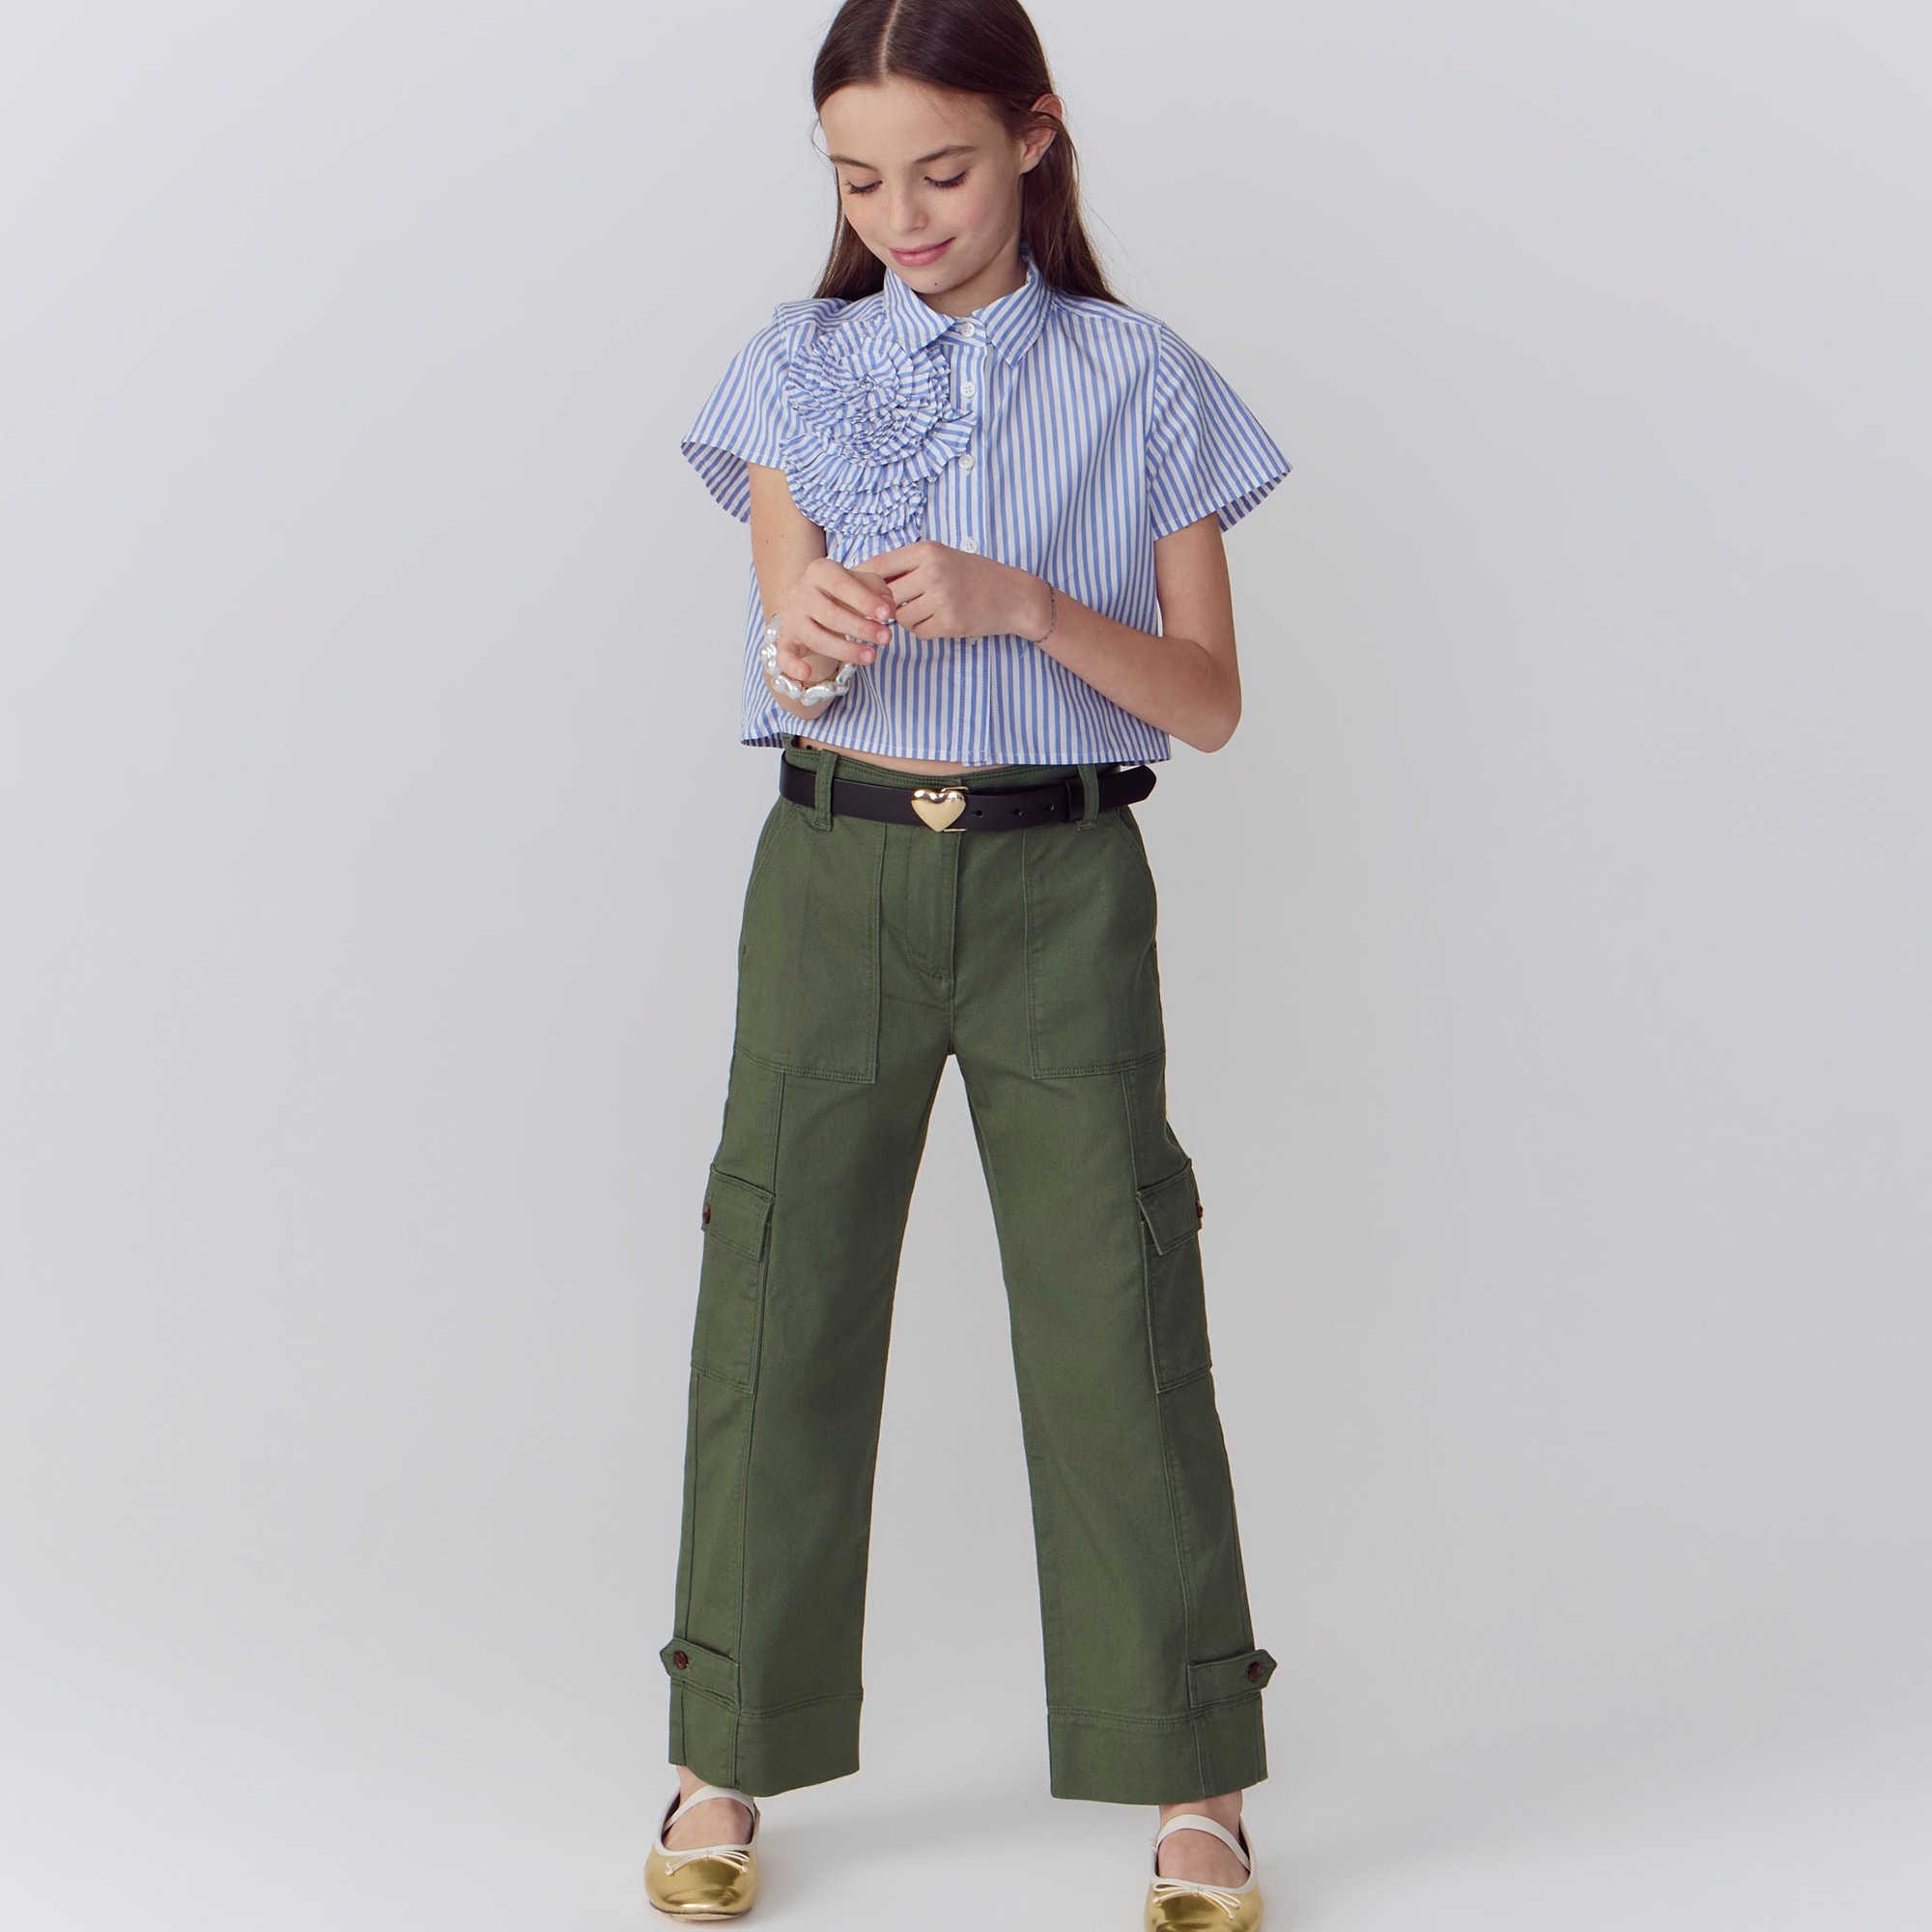  Girls' cargo pant in stretch chino